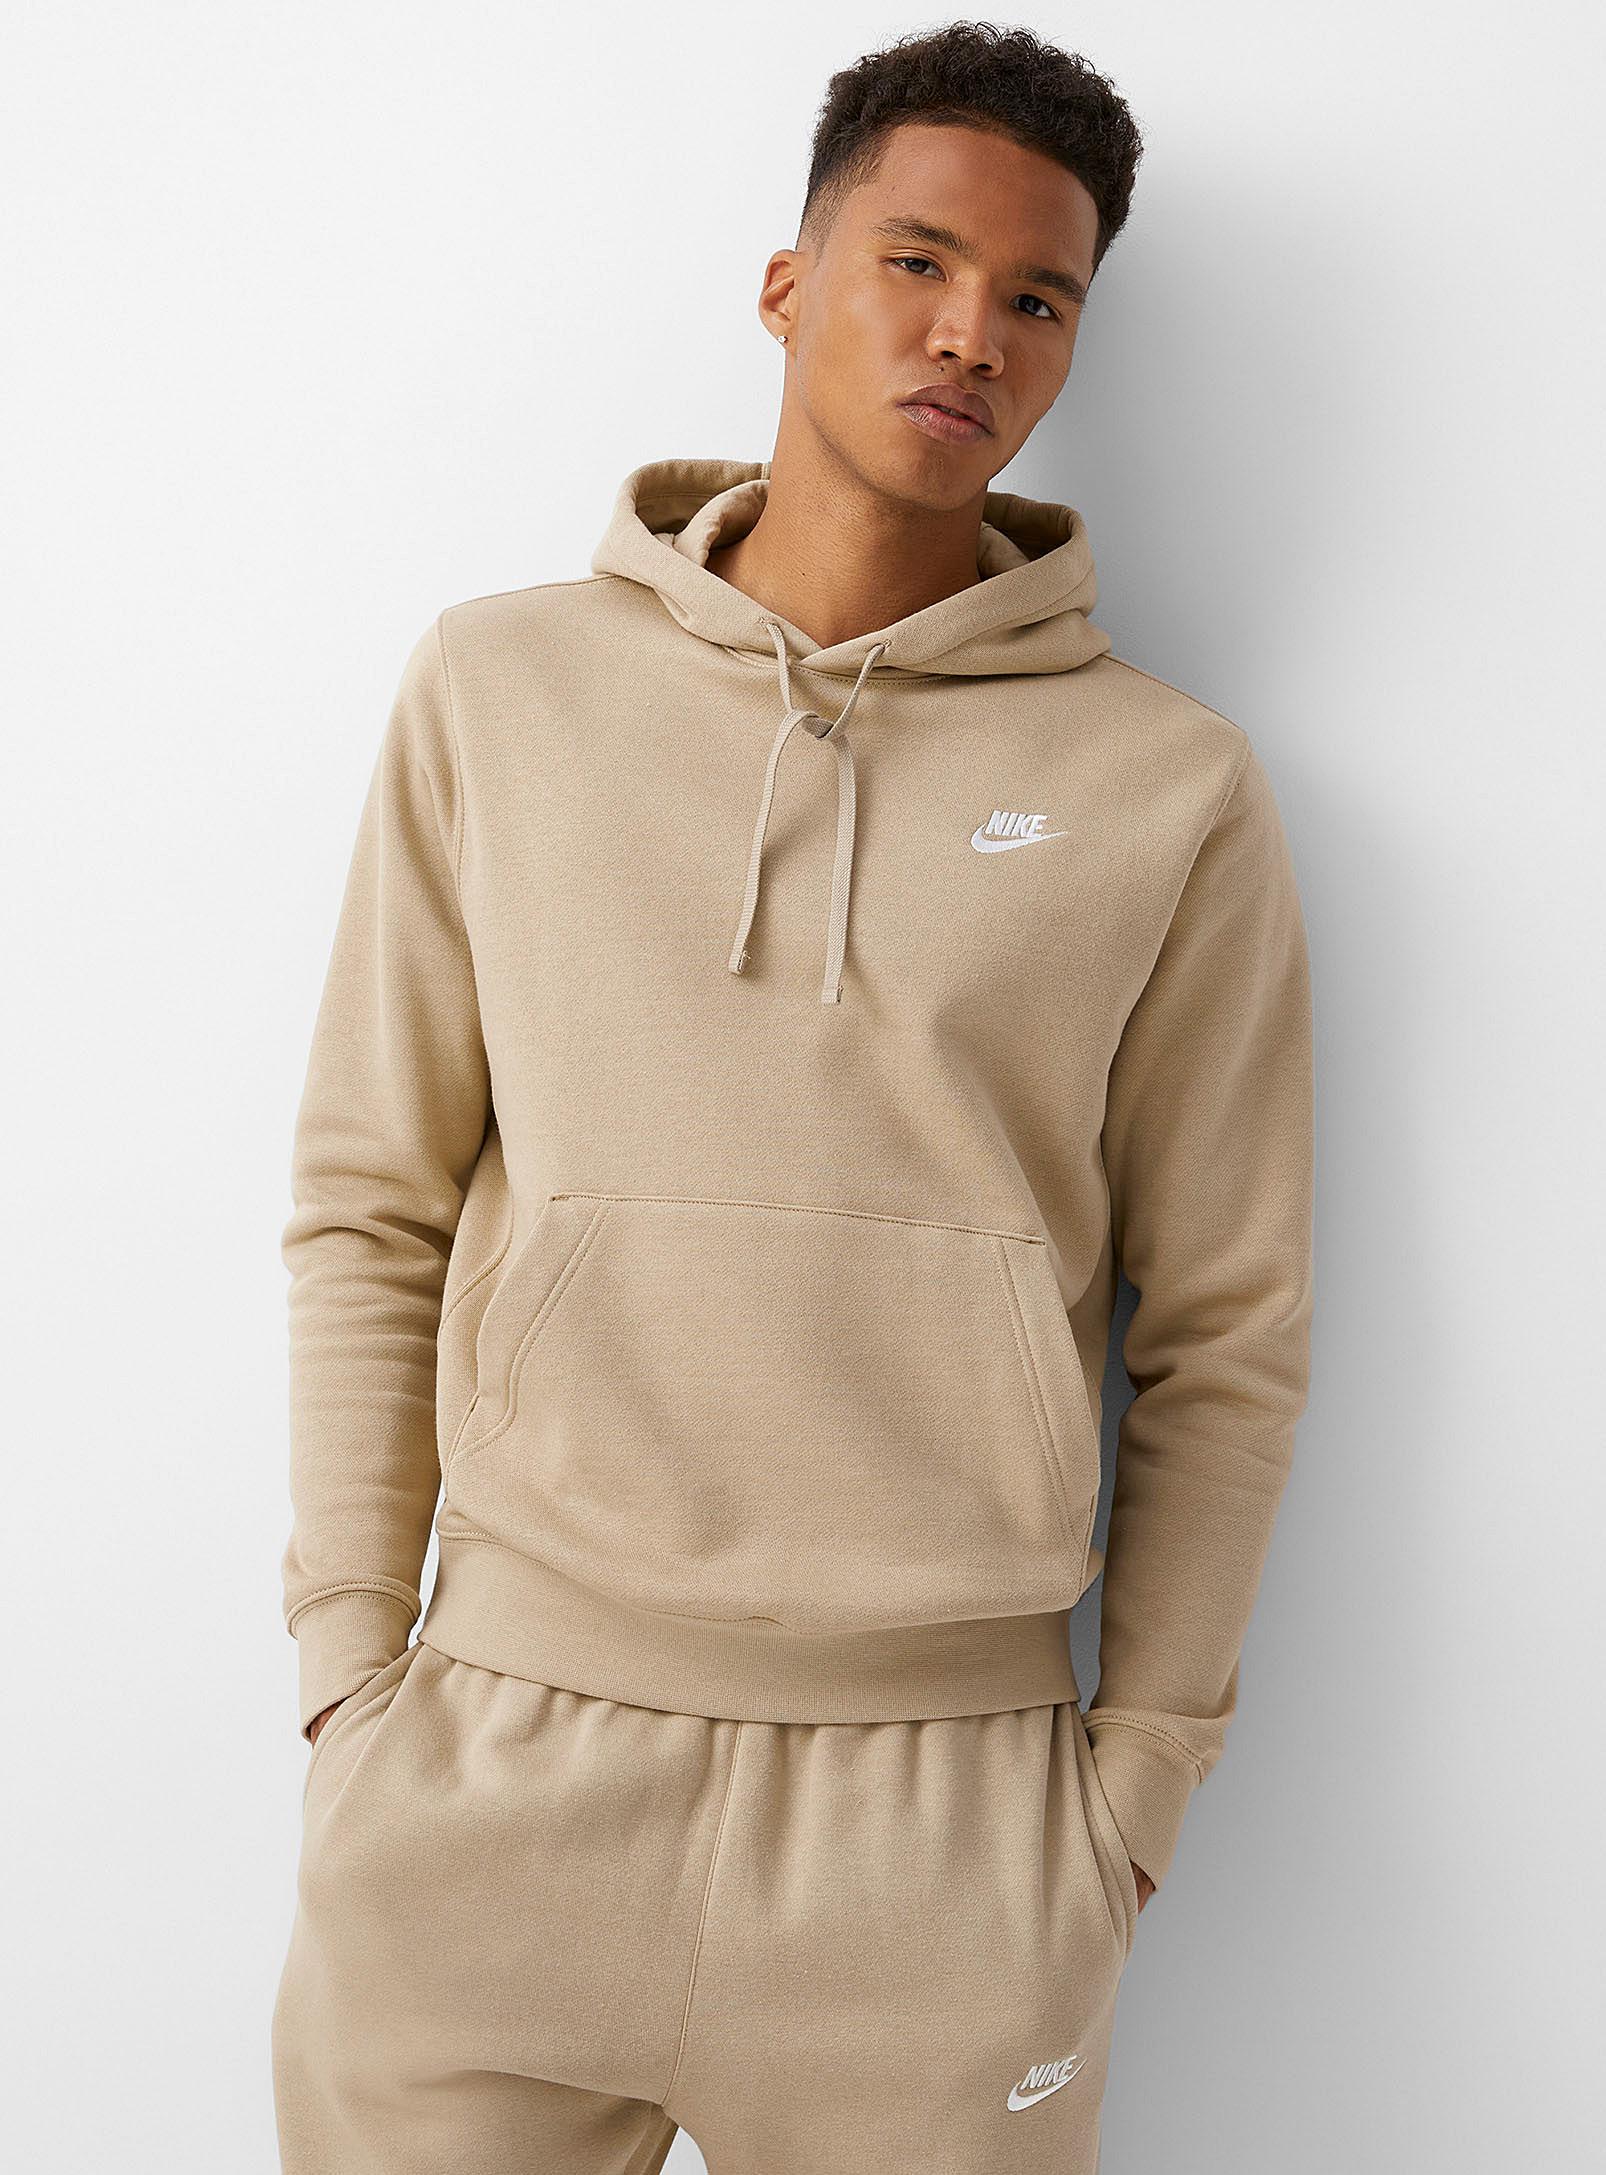 Nike Embroidered Swoosh Hoodie in Natural for Men